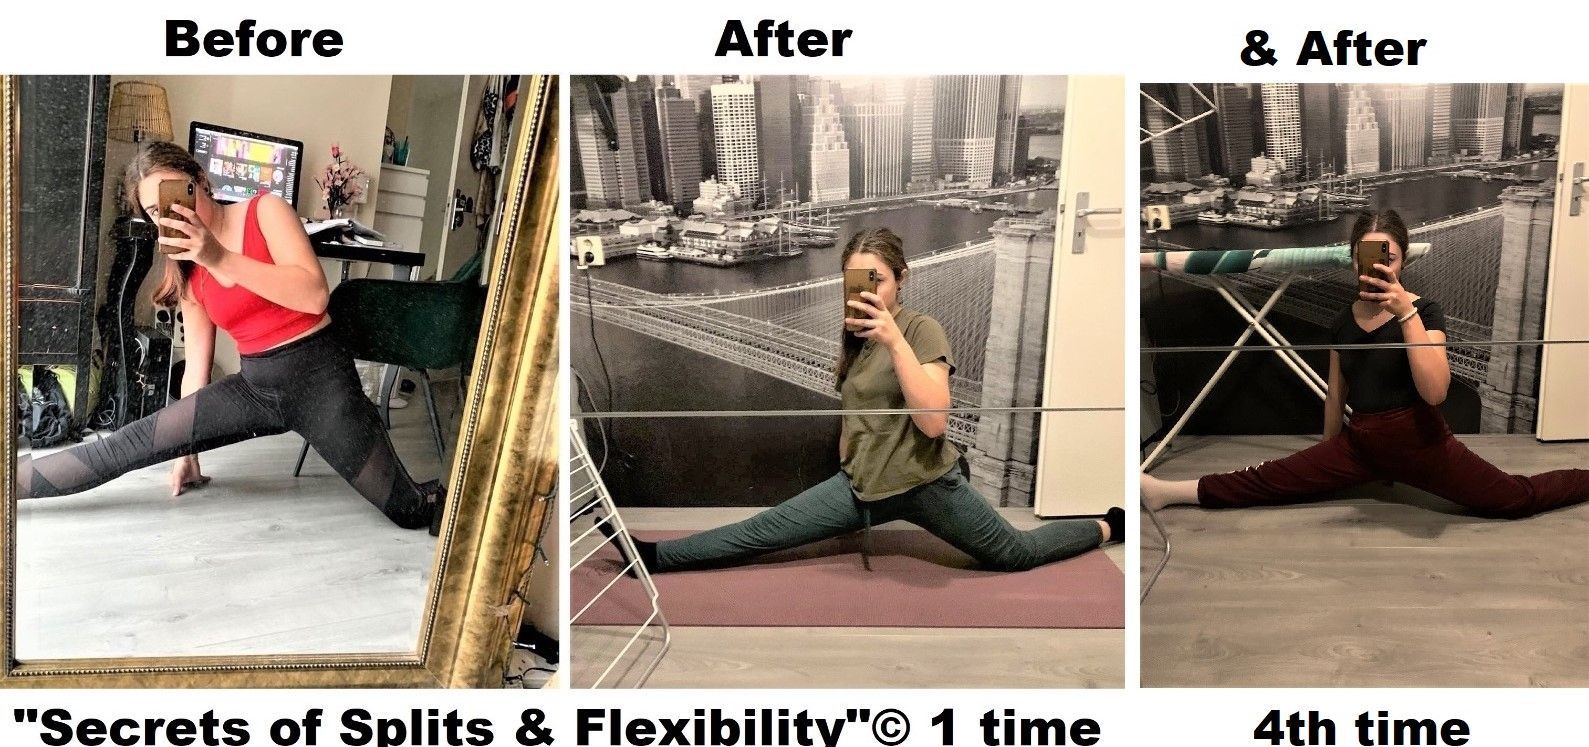 Before & After Results Course Member Who Trained With "Secrets Of Splits & Flexibility" ( Just 1 time & 4th time